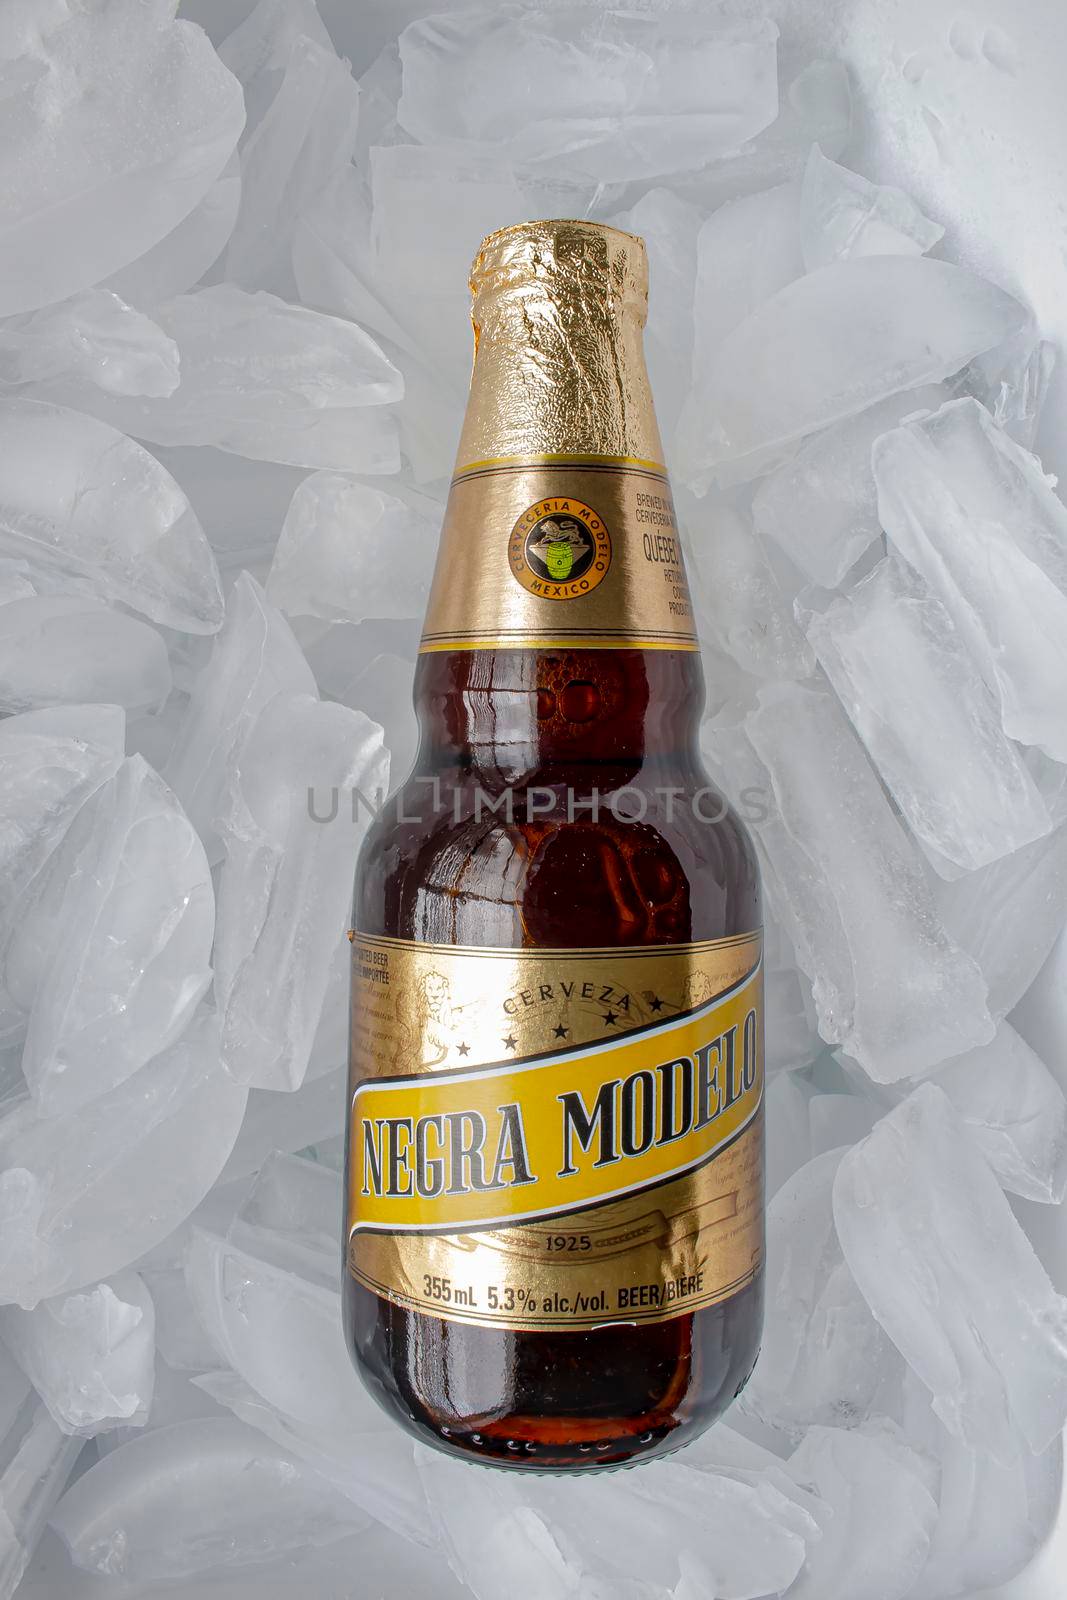 Calgary, Alberta, Canada. May 20, 2020. A Mexican beer Negra Modelo bottle on a bed of ice